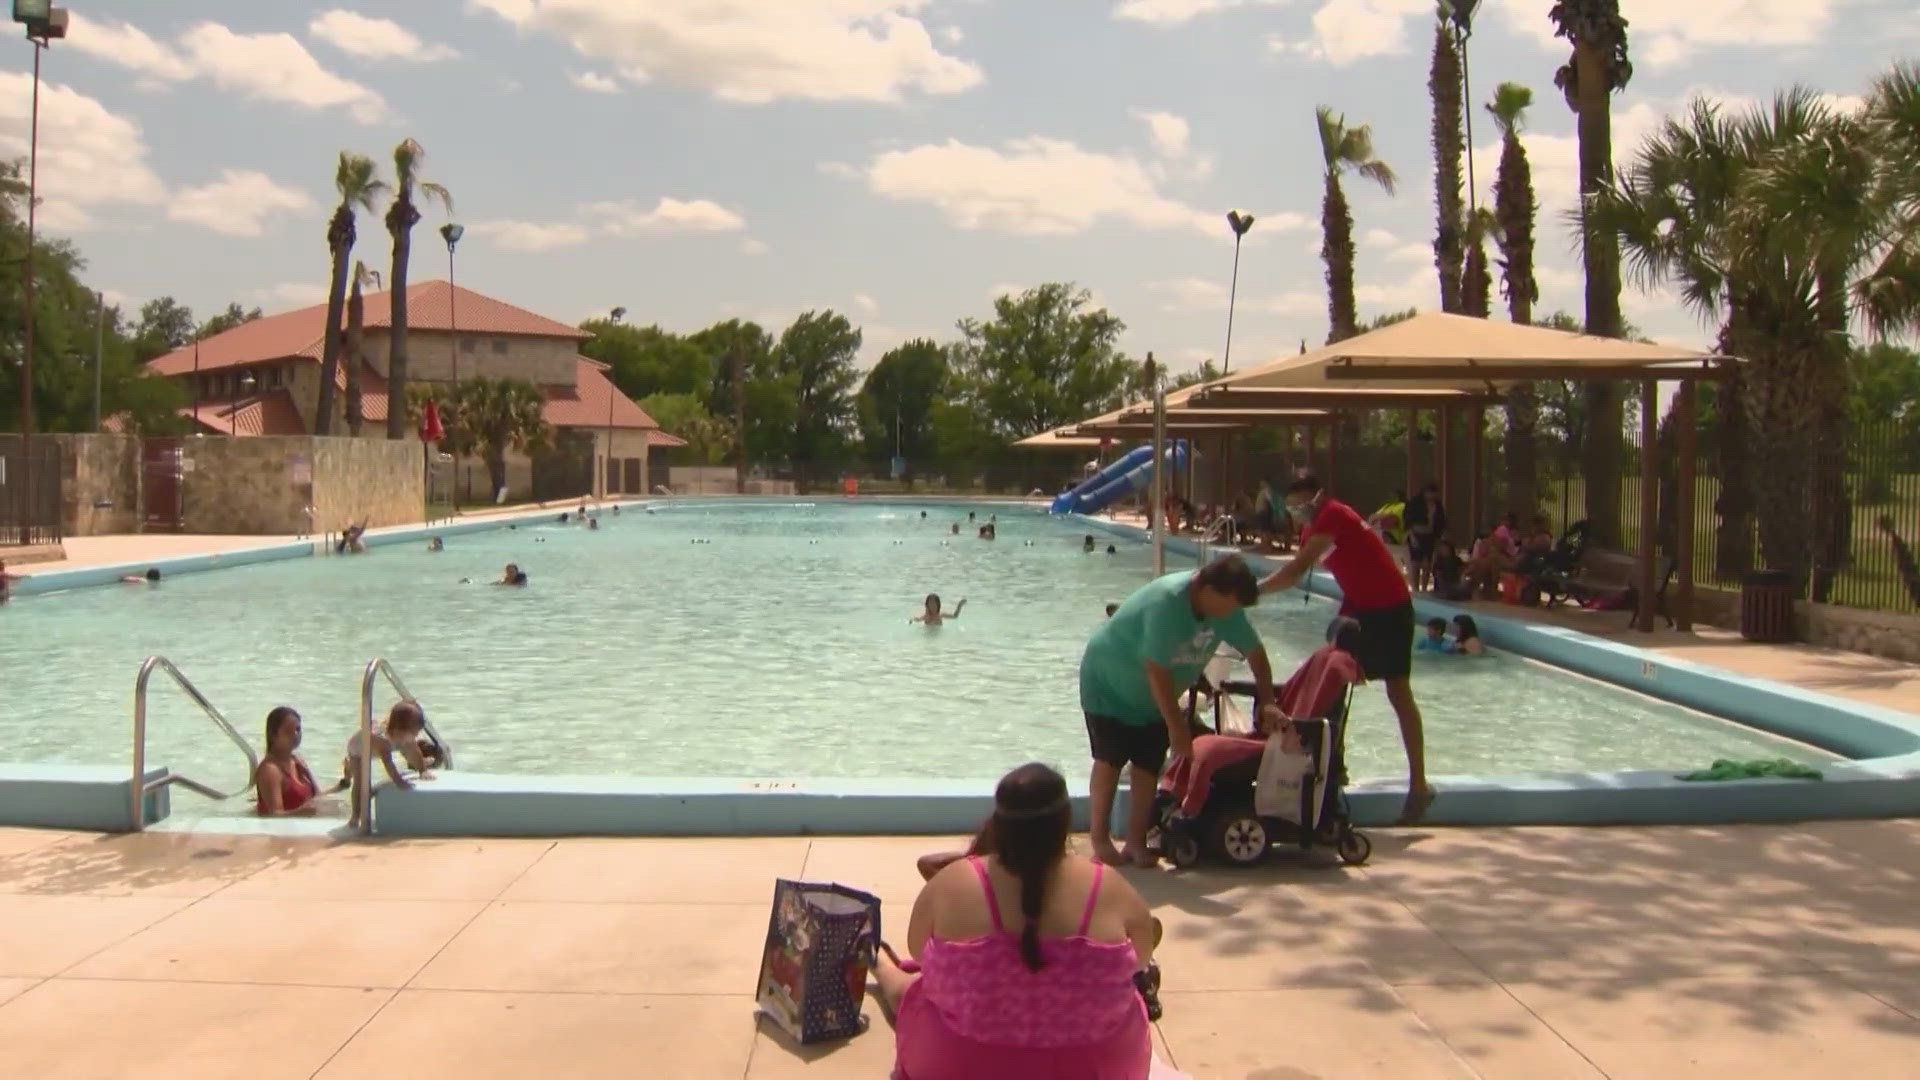 Get the swimsuits ready as 24 public pools are open in San Antonio for summer season